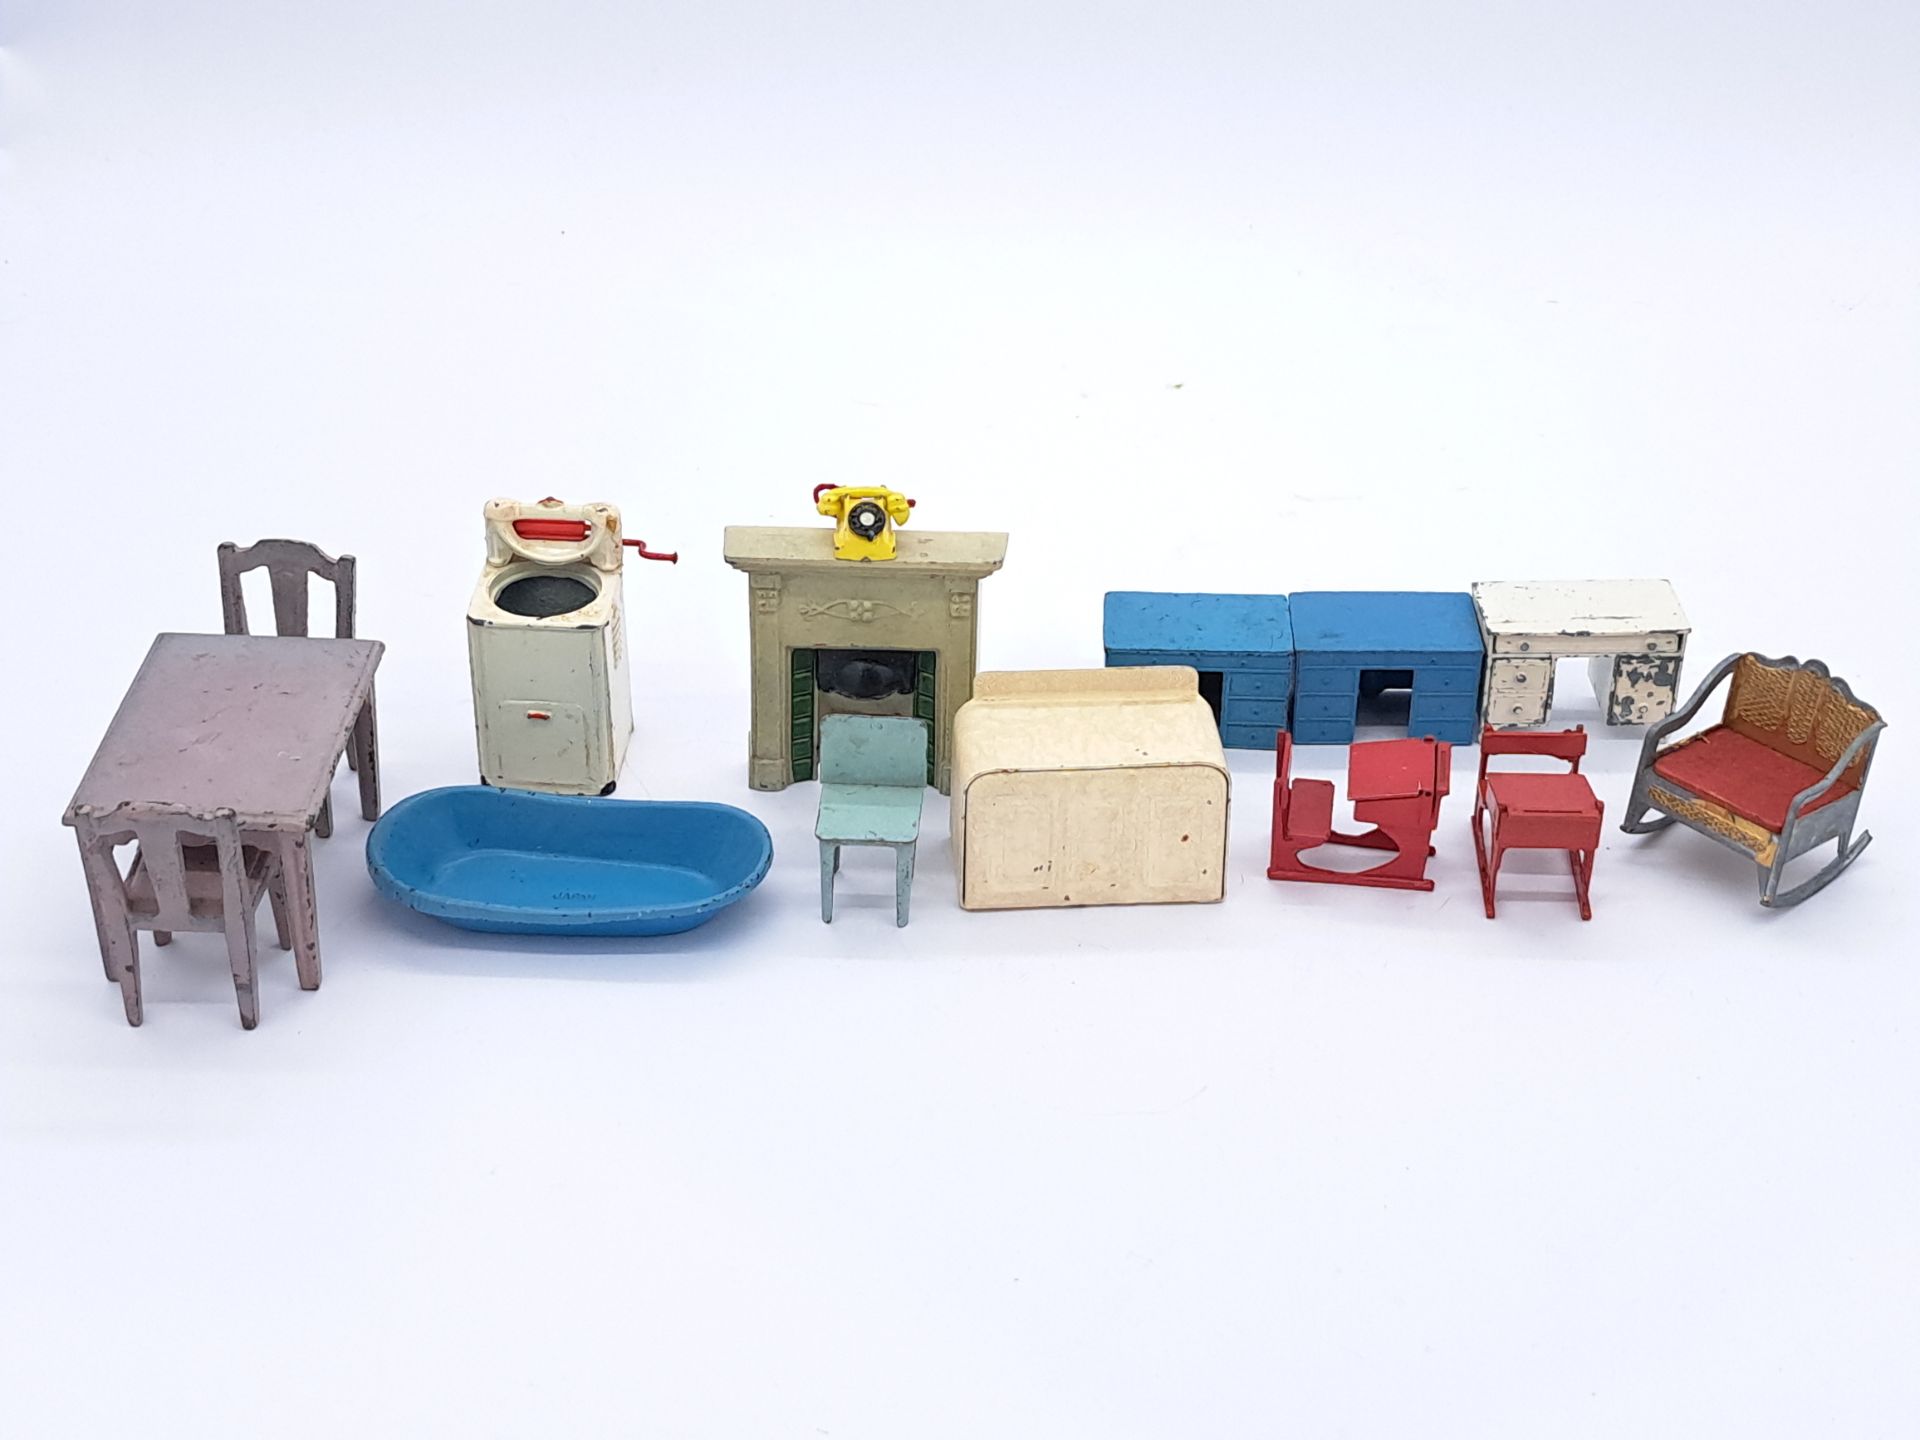 Quantity of painted metal dollhouse furniture